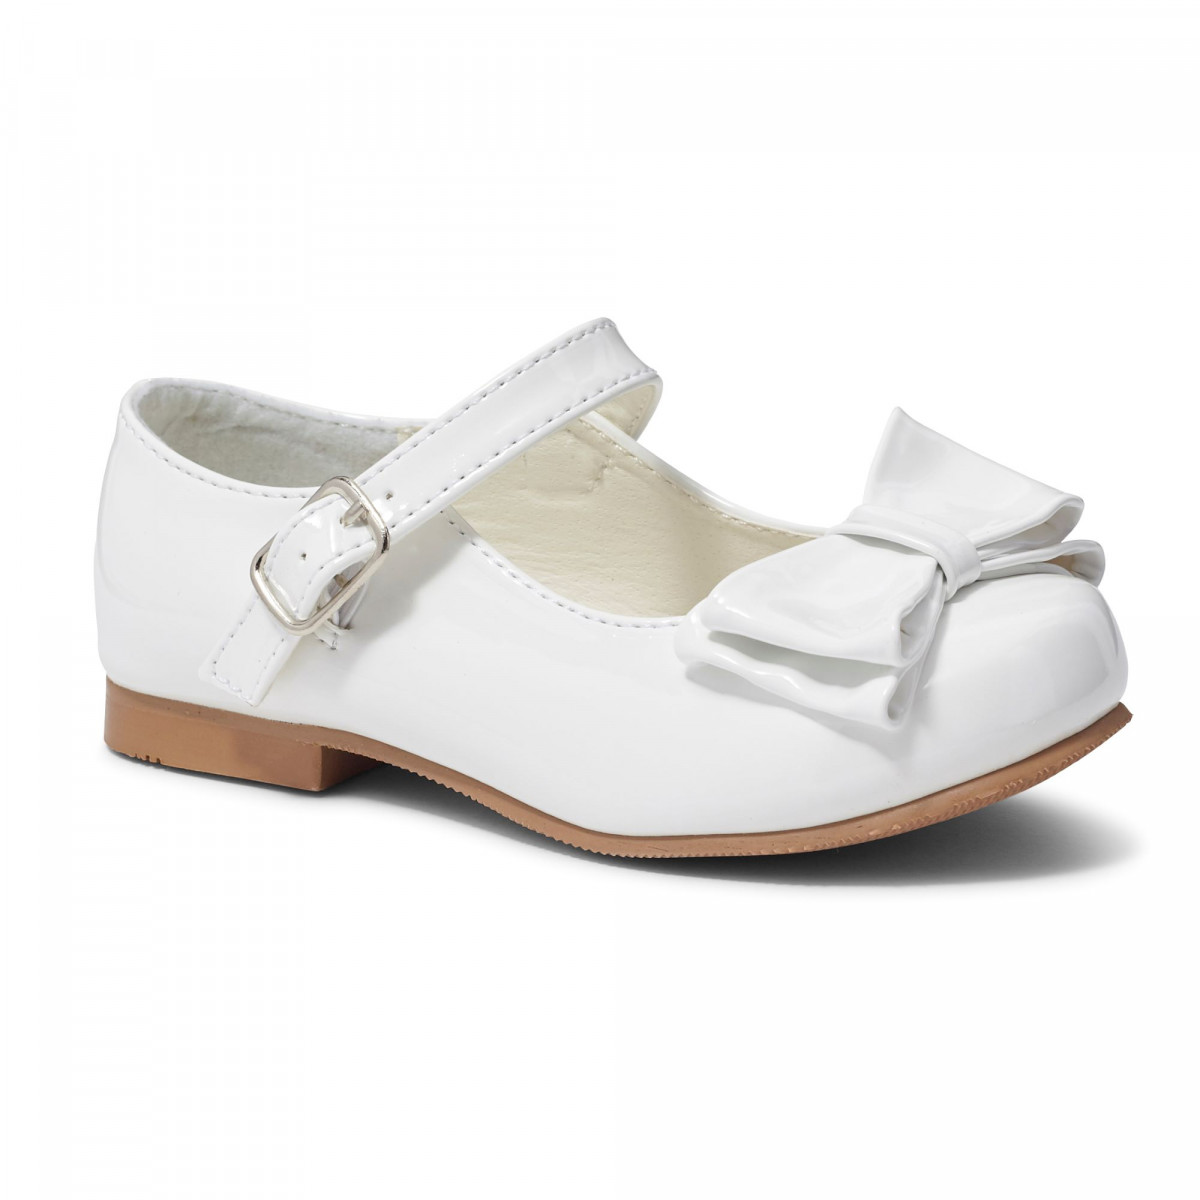 Girls White Patent shoe with bow by Sevva